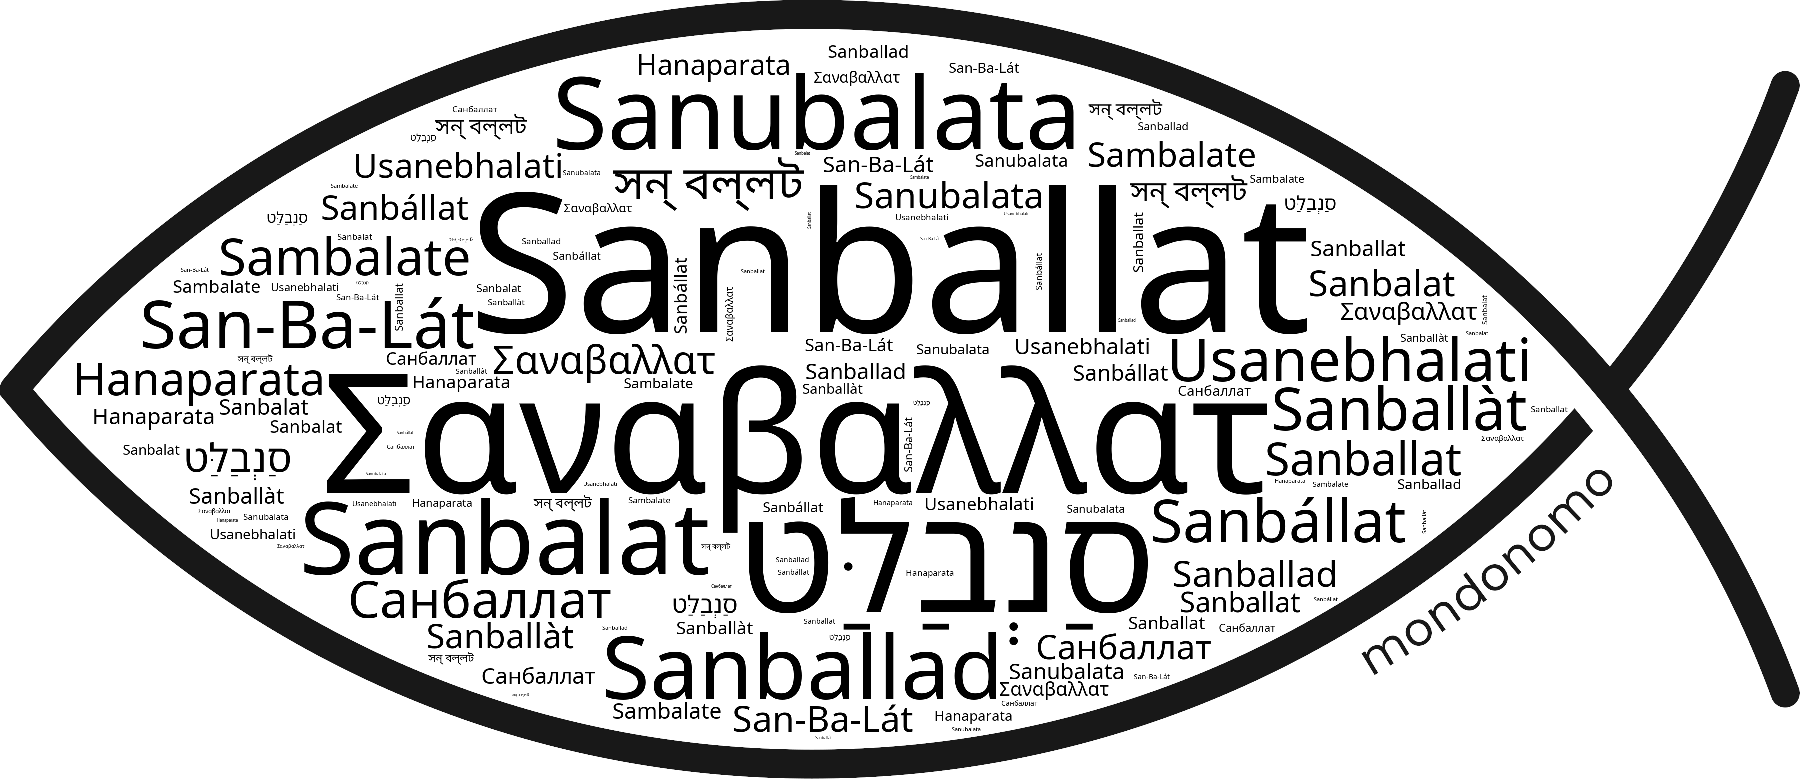 Name Sanballat in the world's Bibles